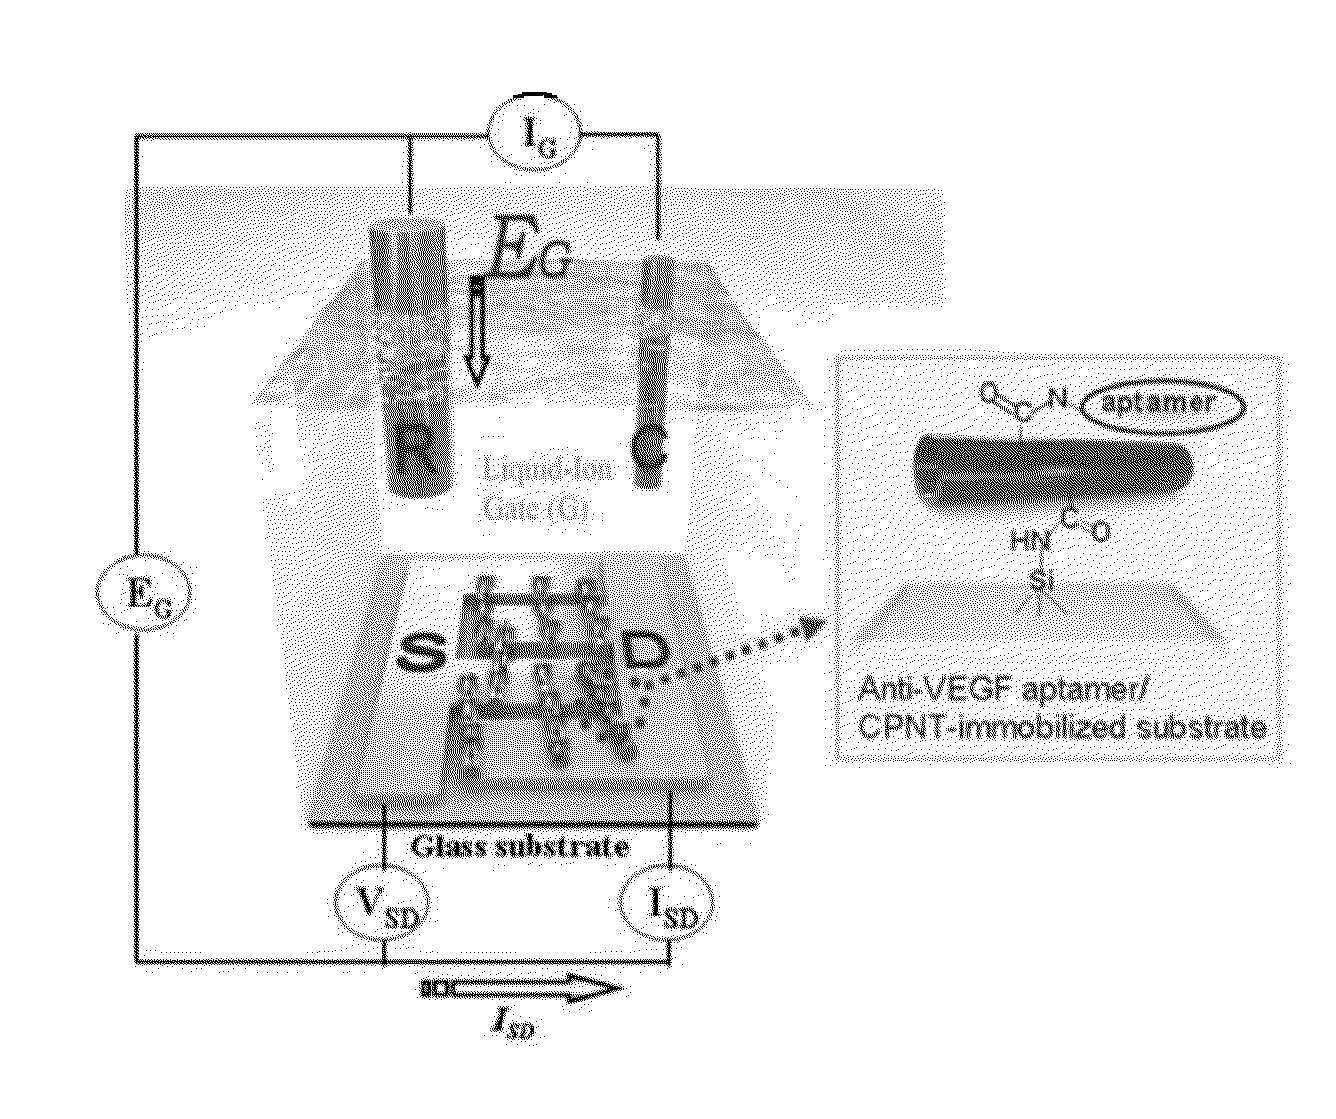 Method for fabricating novel high-performance field-effect transistor biosensor based on conductive polymer nanomaterials functionalized with anti-VEGF adapter